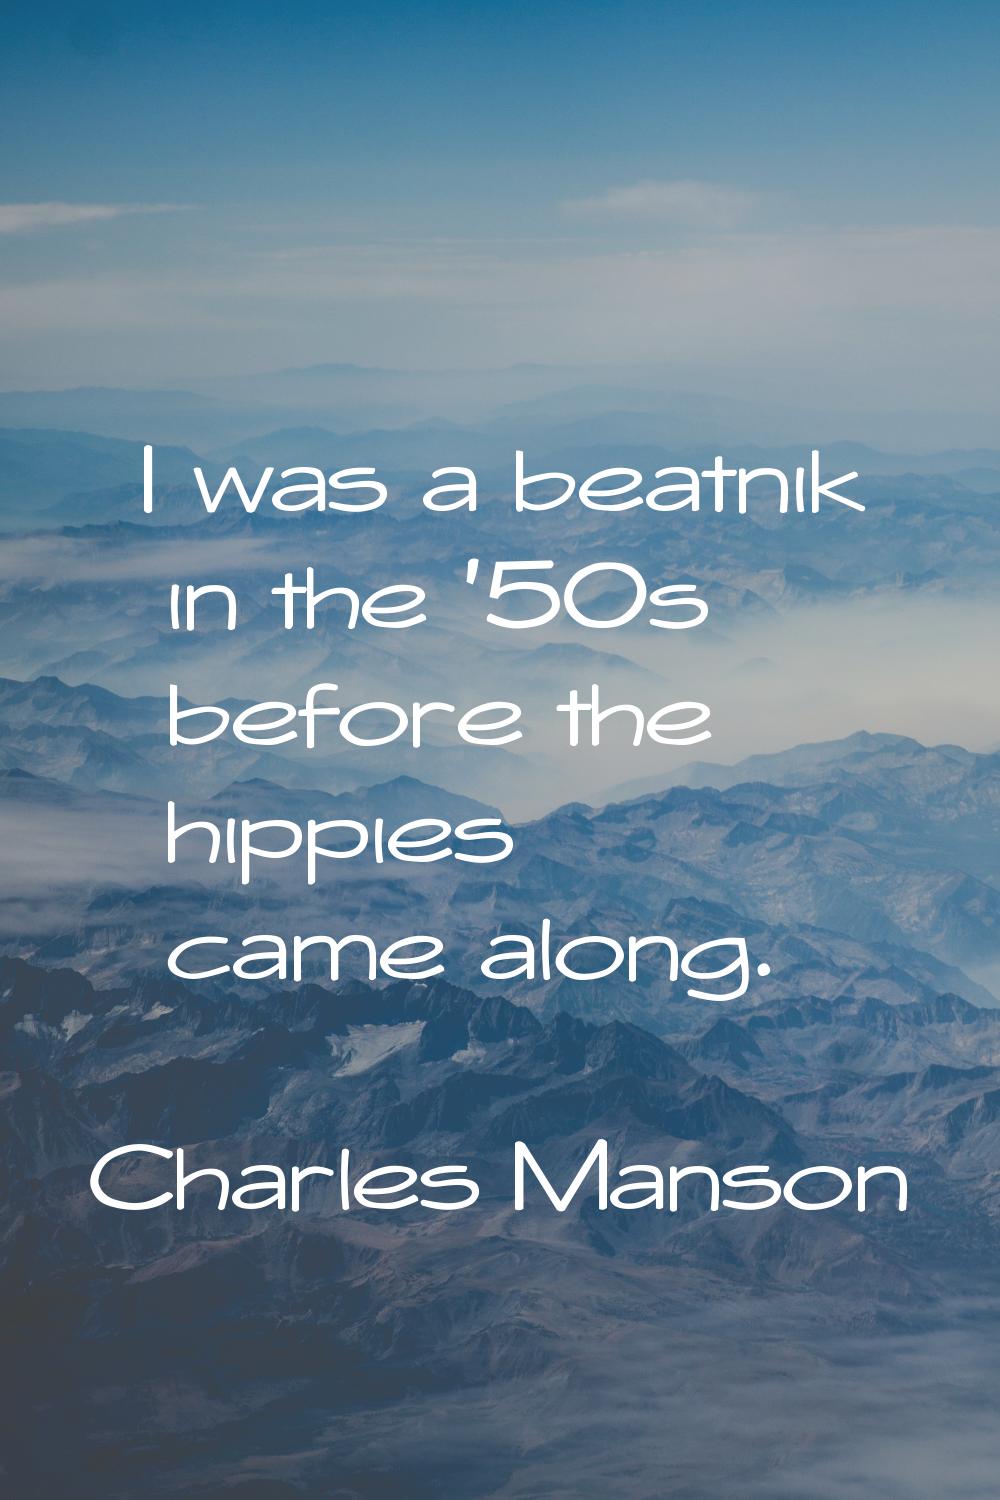 I was a beatnik in the '50s before the hippies came along.